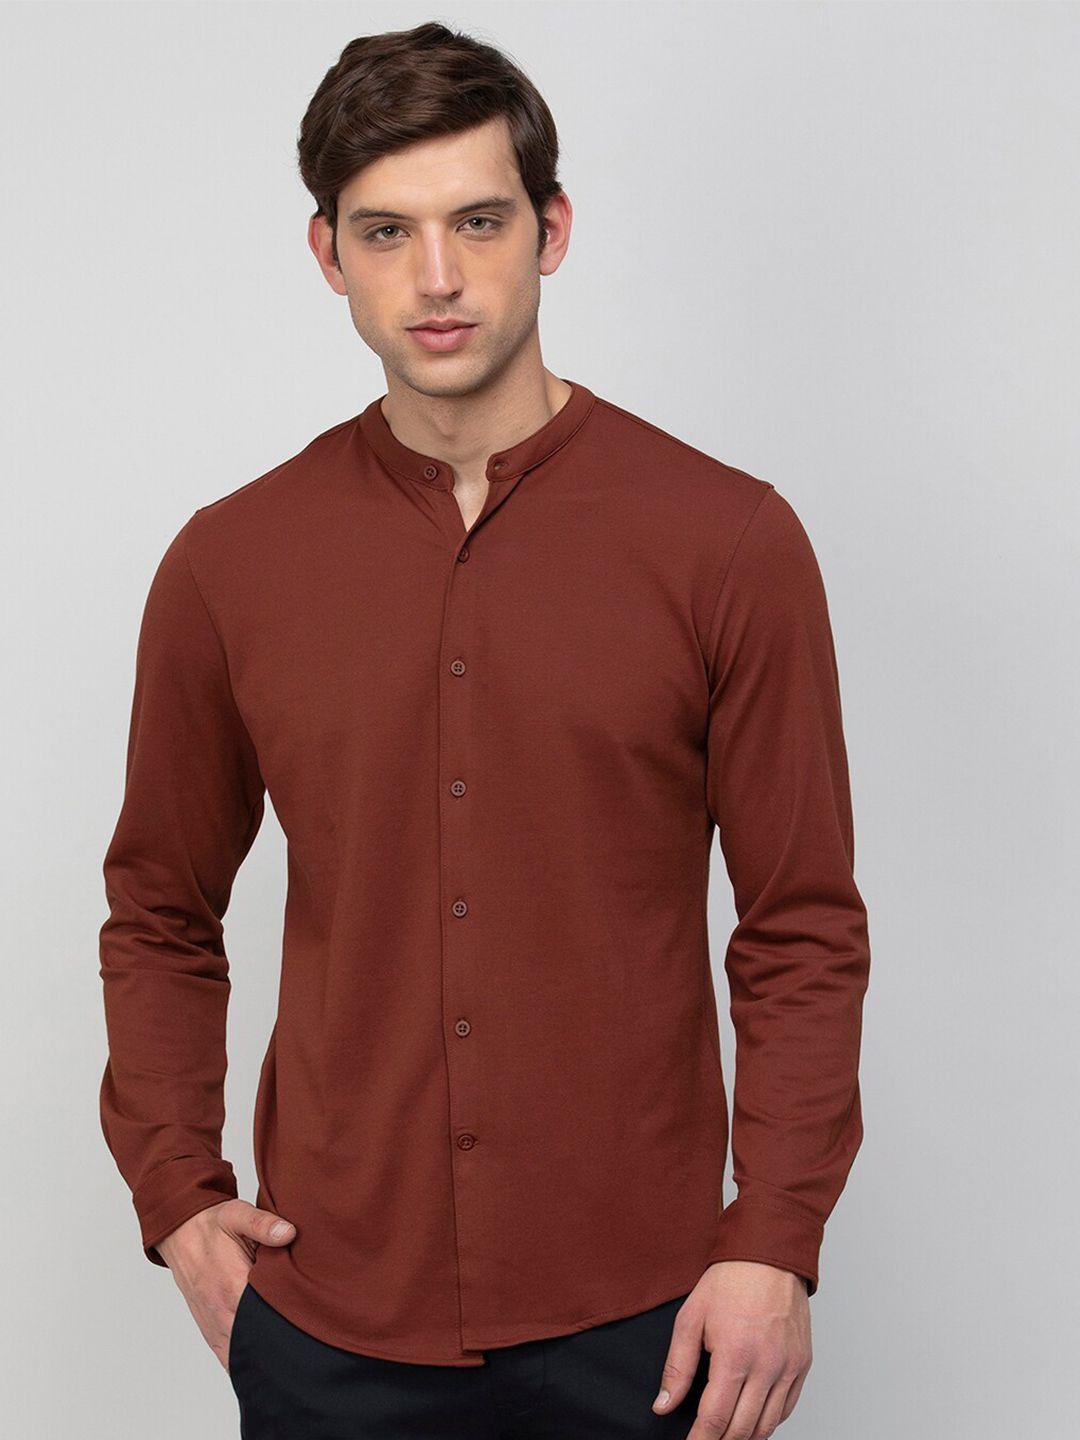 code by lifestyle men casual cotton shirt